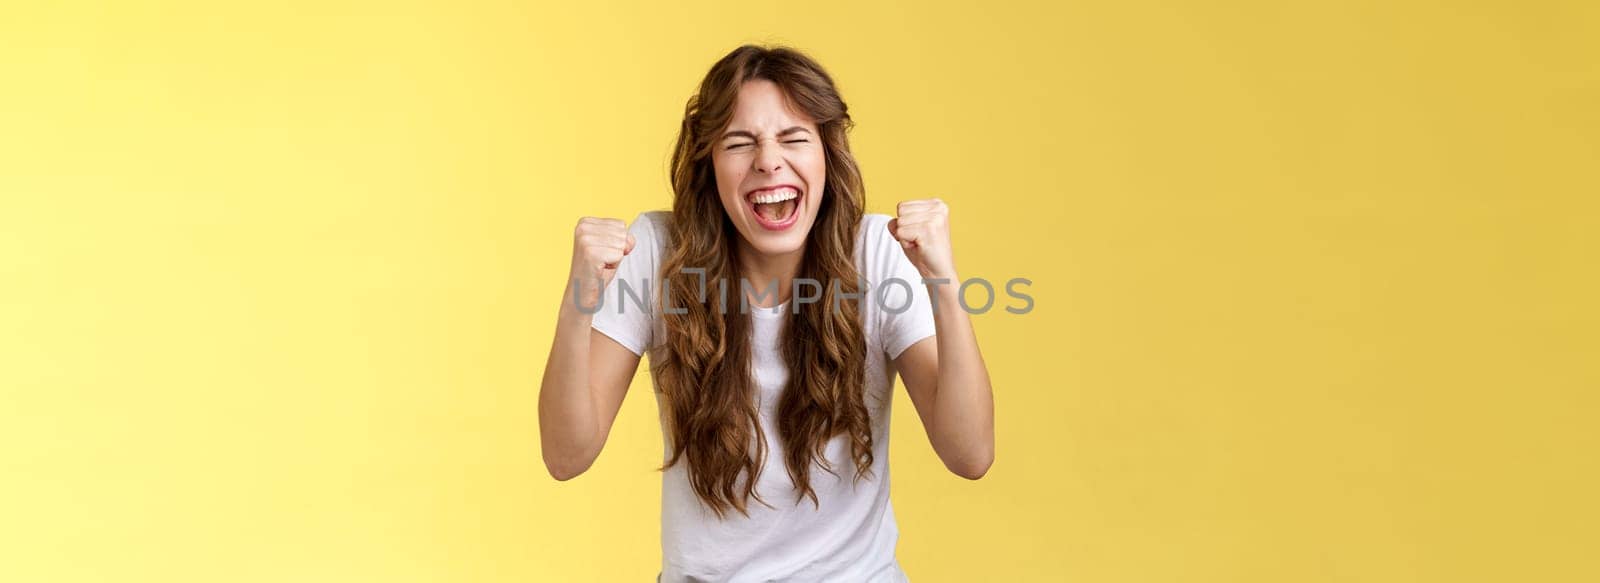 Cheerful excited happy enthusiastic girl yelling rooting wanna win badly fist pump celebratory satisfied awesome success winning triumphing joyfully close eyes shaking clench arms yellow background. Lifestyle.